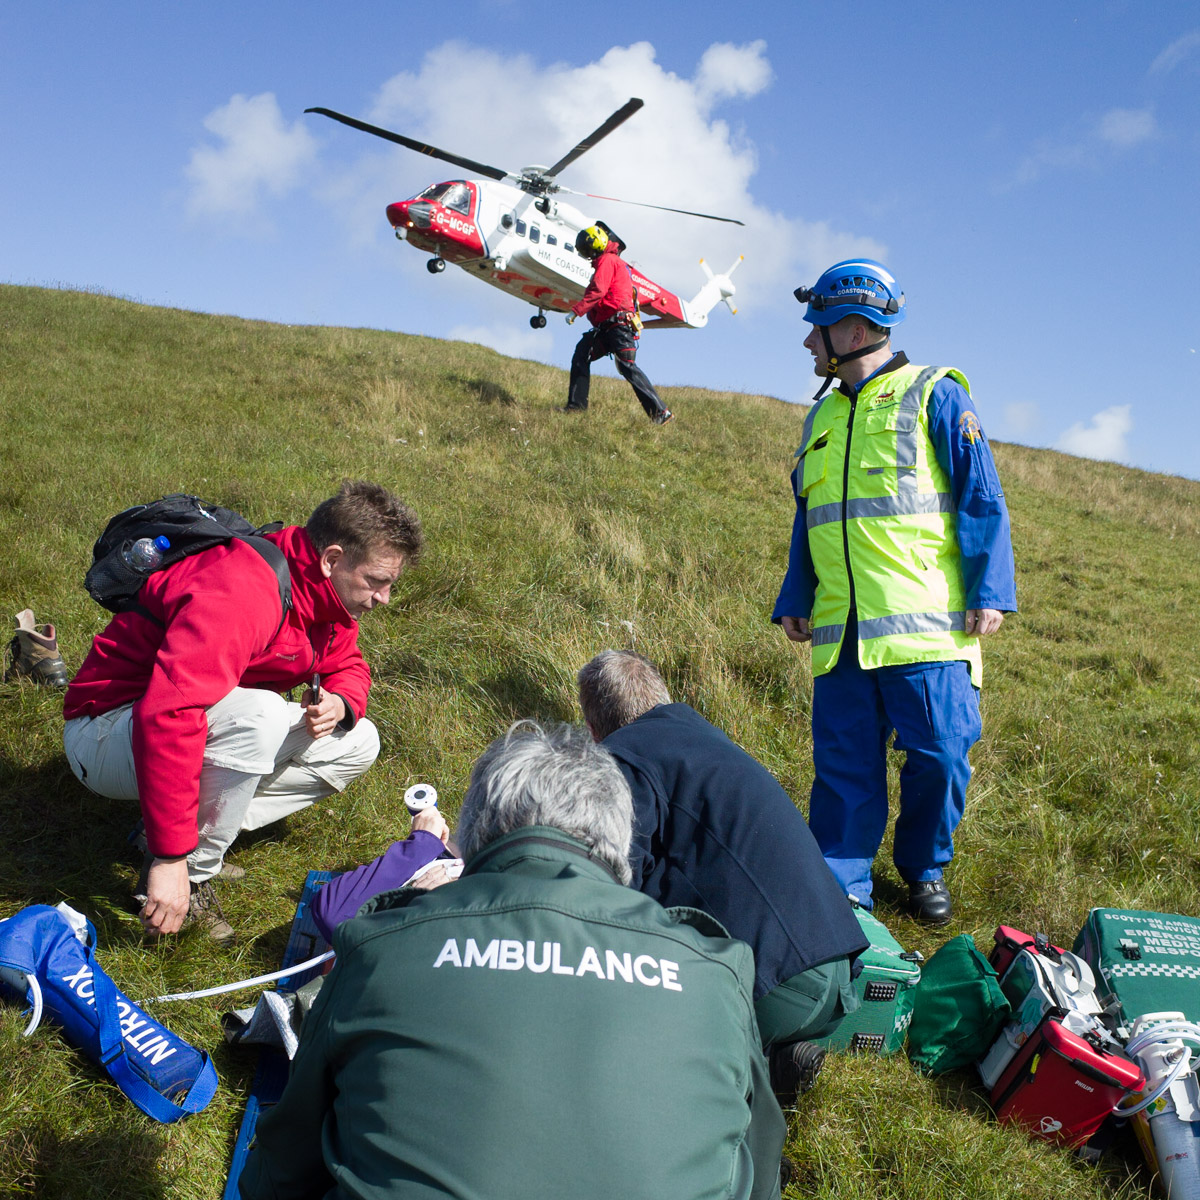 Big..REALLY big shout for the Coastguard Service & their colleagues from the SNHS Paramedics providing assistance in remote & rural areas, here rescuing an injured walker in a remote part of Sutherland, Scotland. #WeAreHighlandsAndIslands  #TheHillsAreAlwaysHere